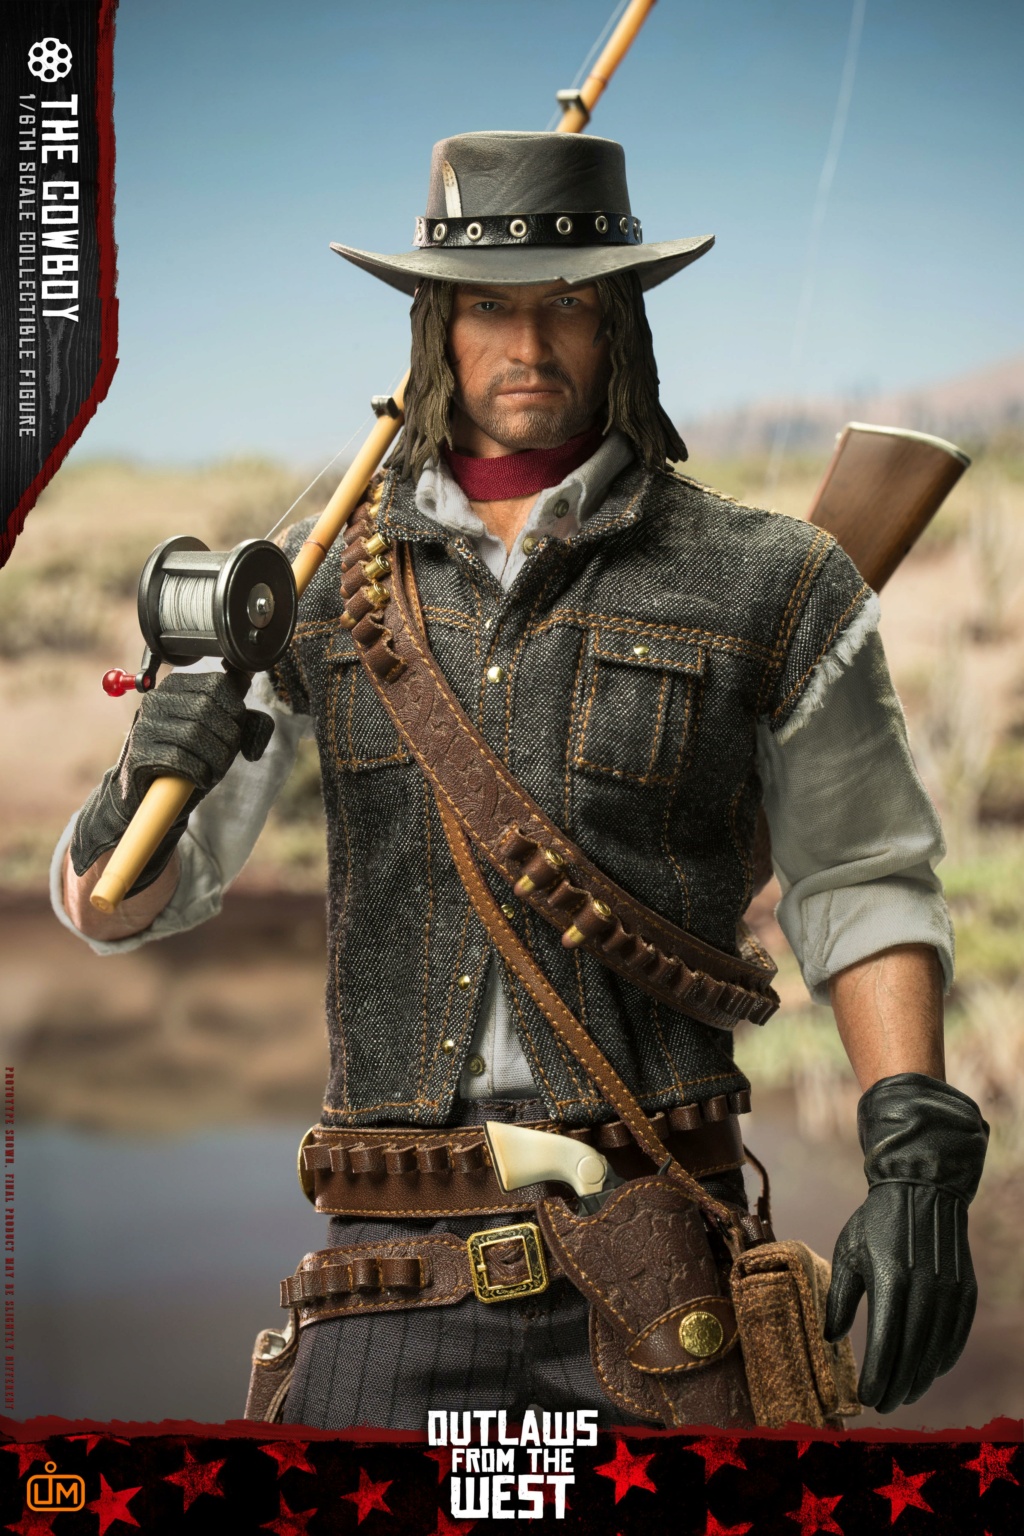 TheCowboy - NEW PRODUCT: LIM TOYS: Outlaws of the West Series: The Cowboy 1/6 scale action figure 41694910